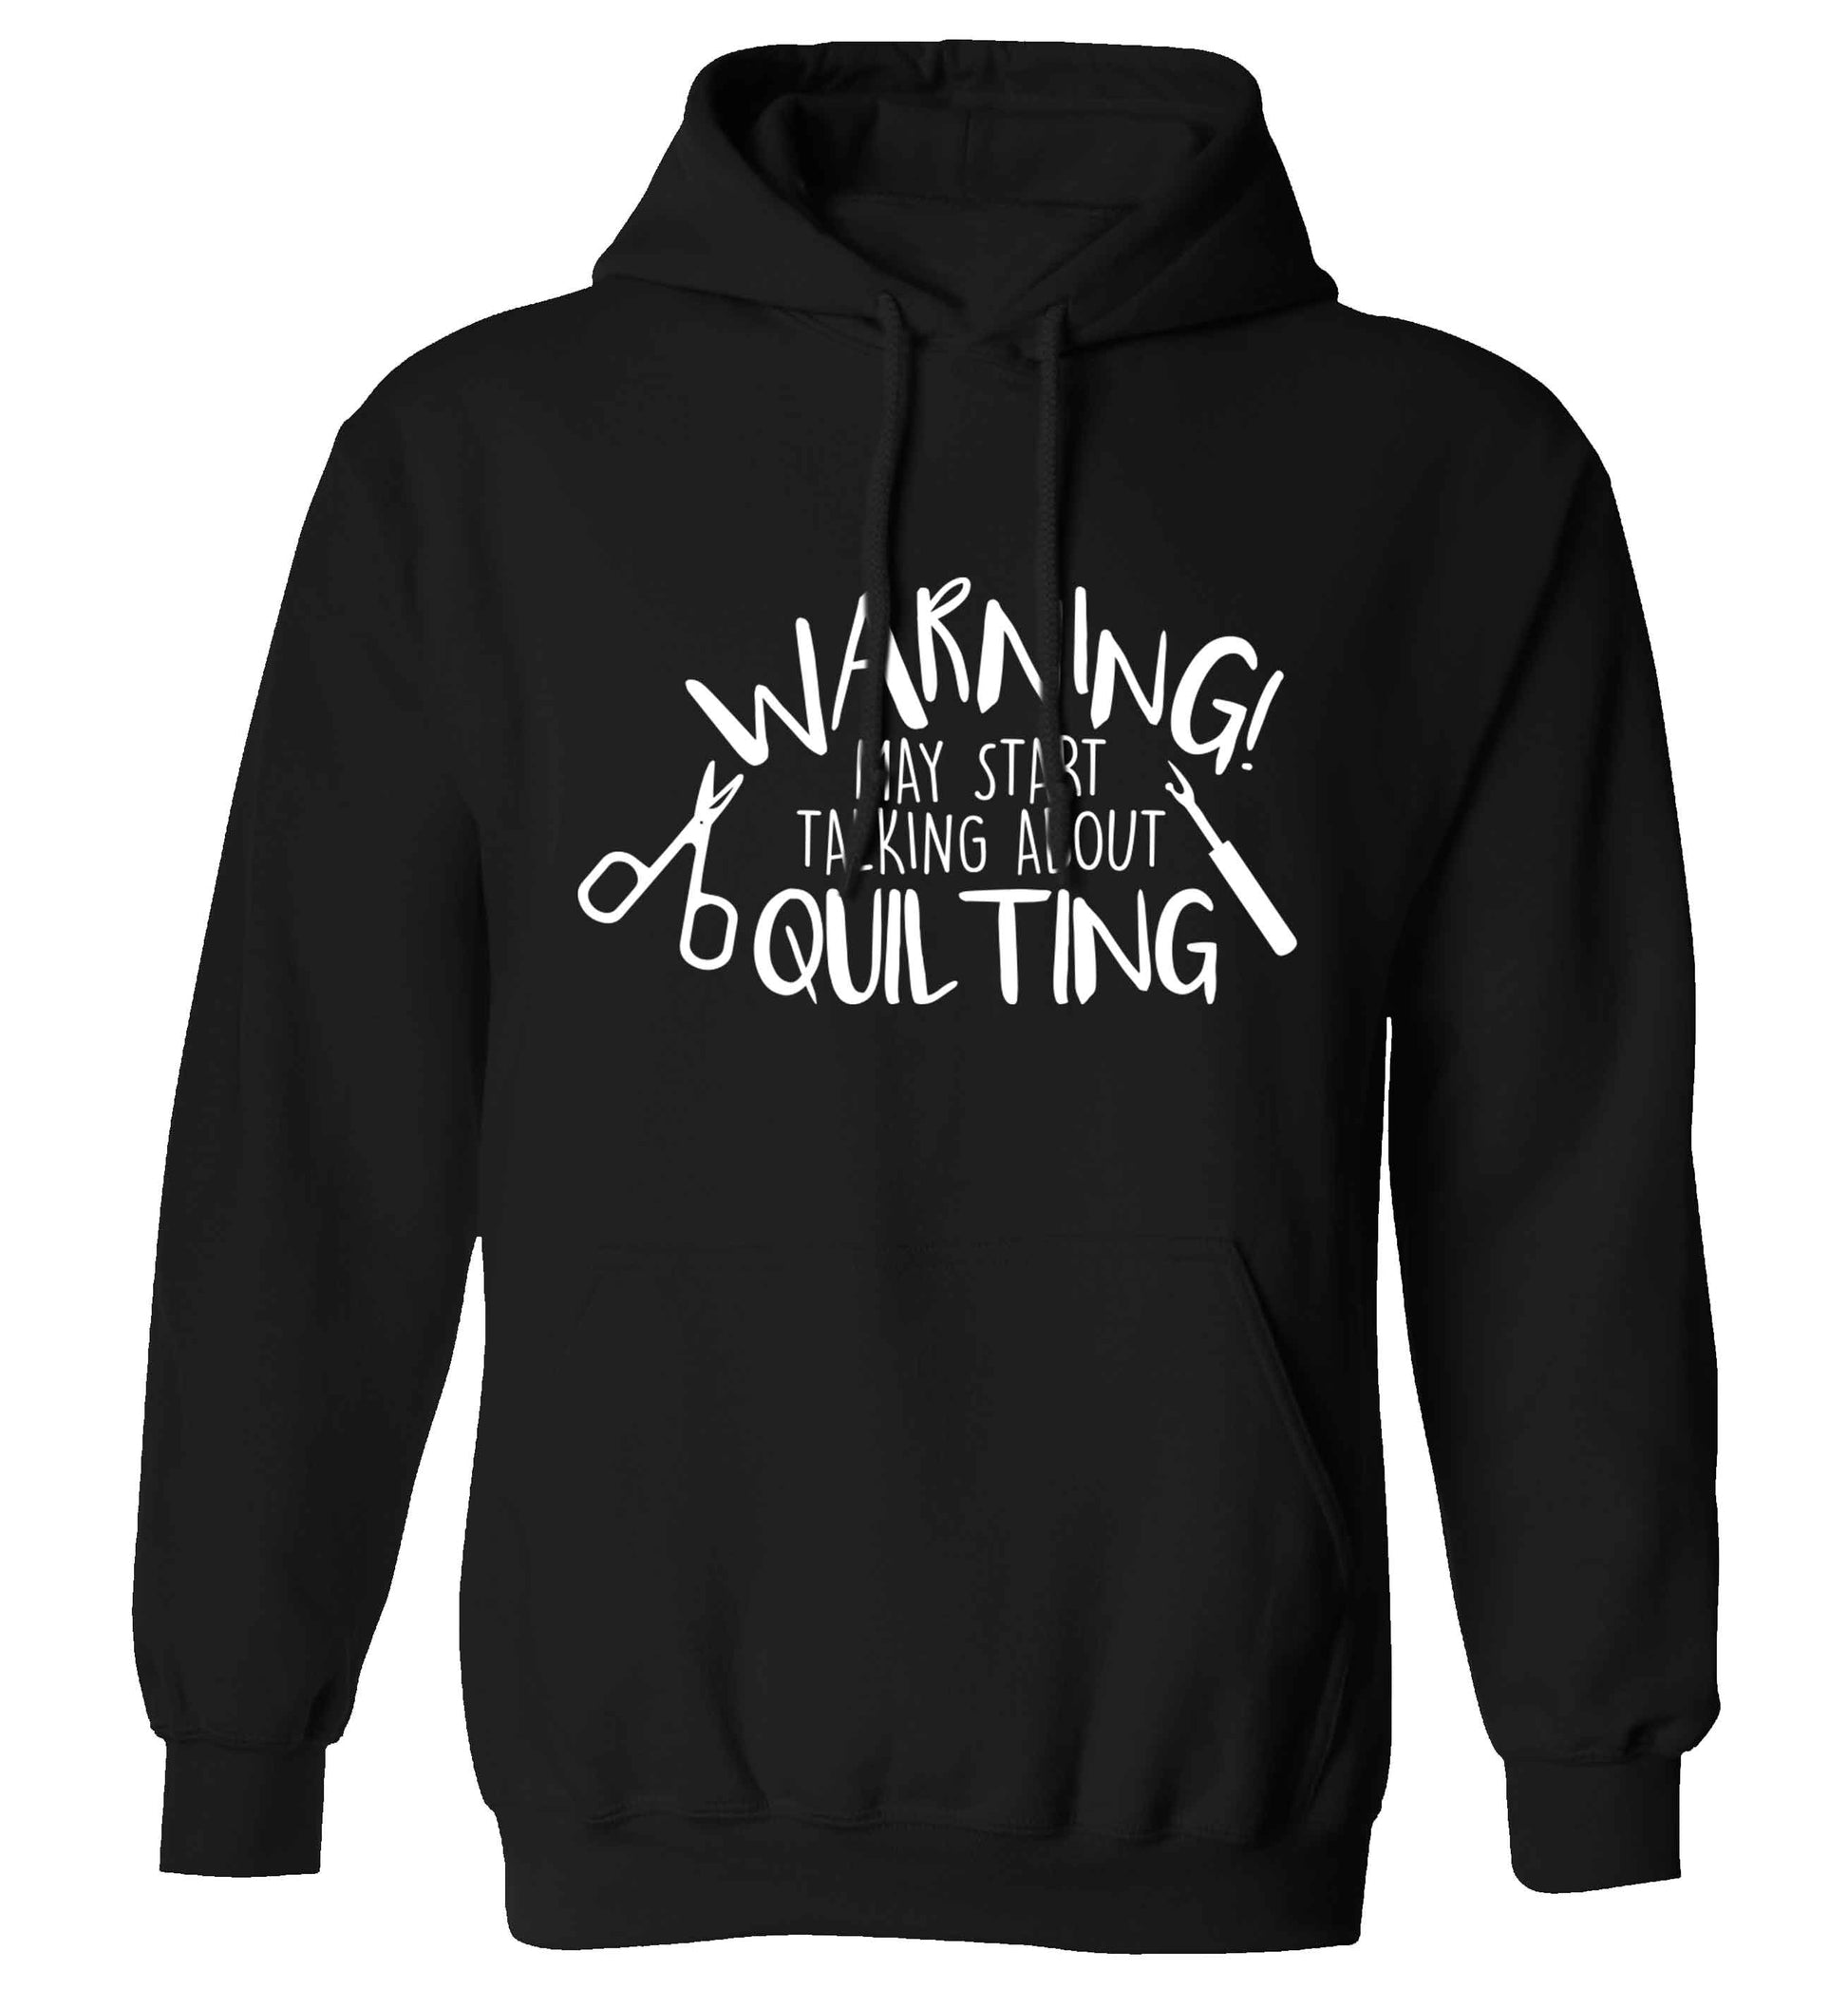 Warning may start talking about quilting adults unisex black hoodie 2XL